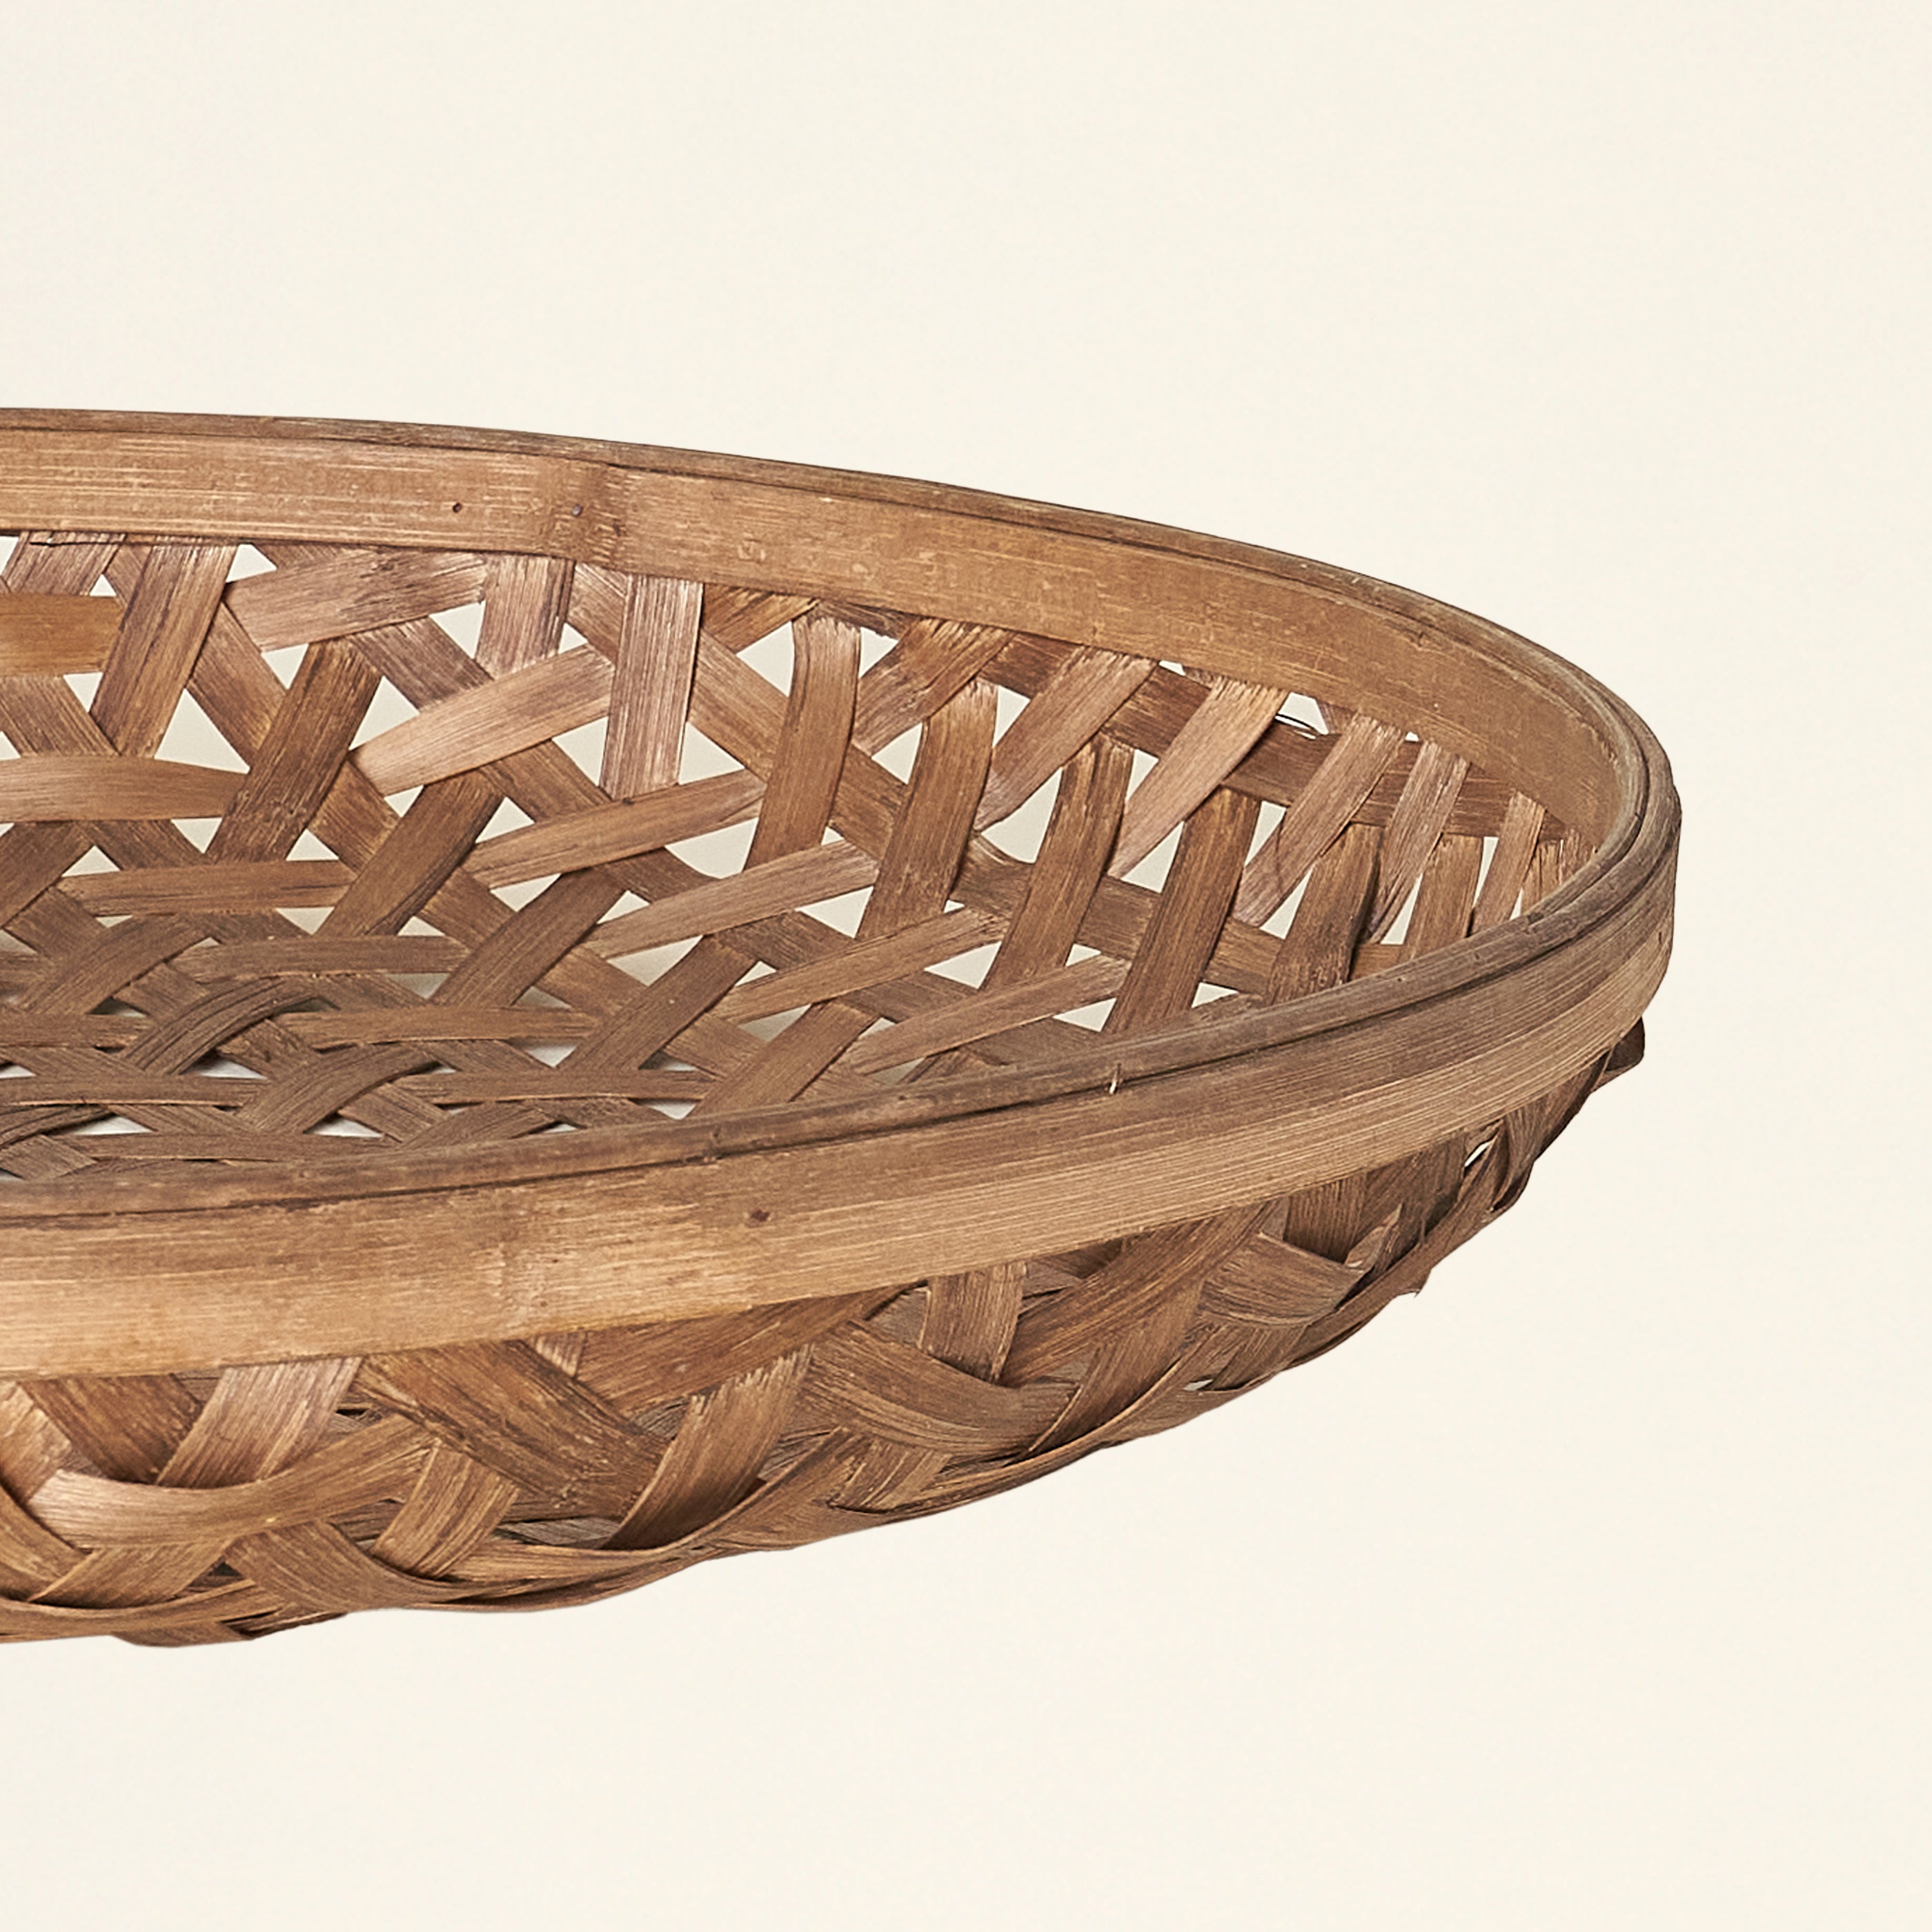 Round Woven Bamboo Baskets - Set of 3